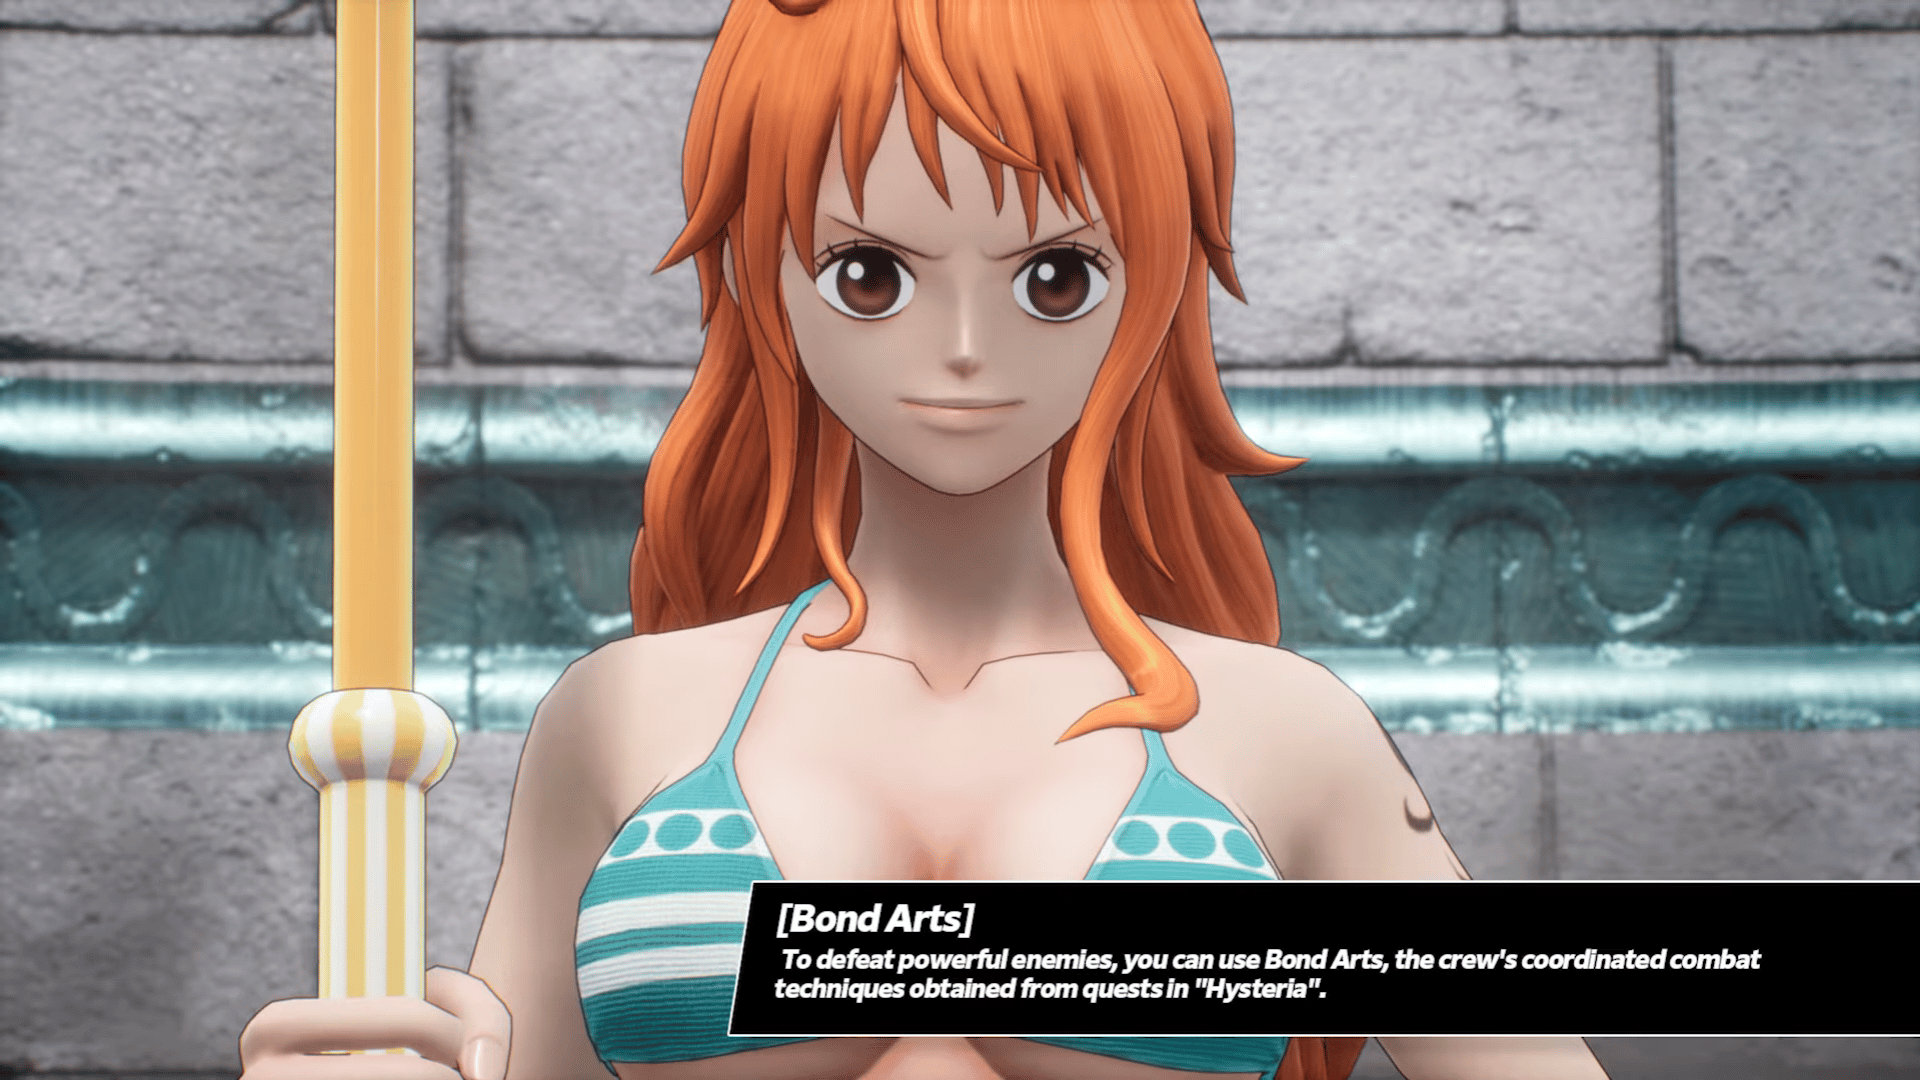 New One Piece Odyssey Water Seven Gameplay Trailer Introduces Memory Link Quests, Bond Arts & More; Enies Lobby Teased